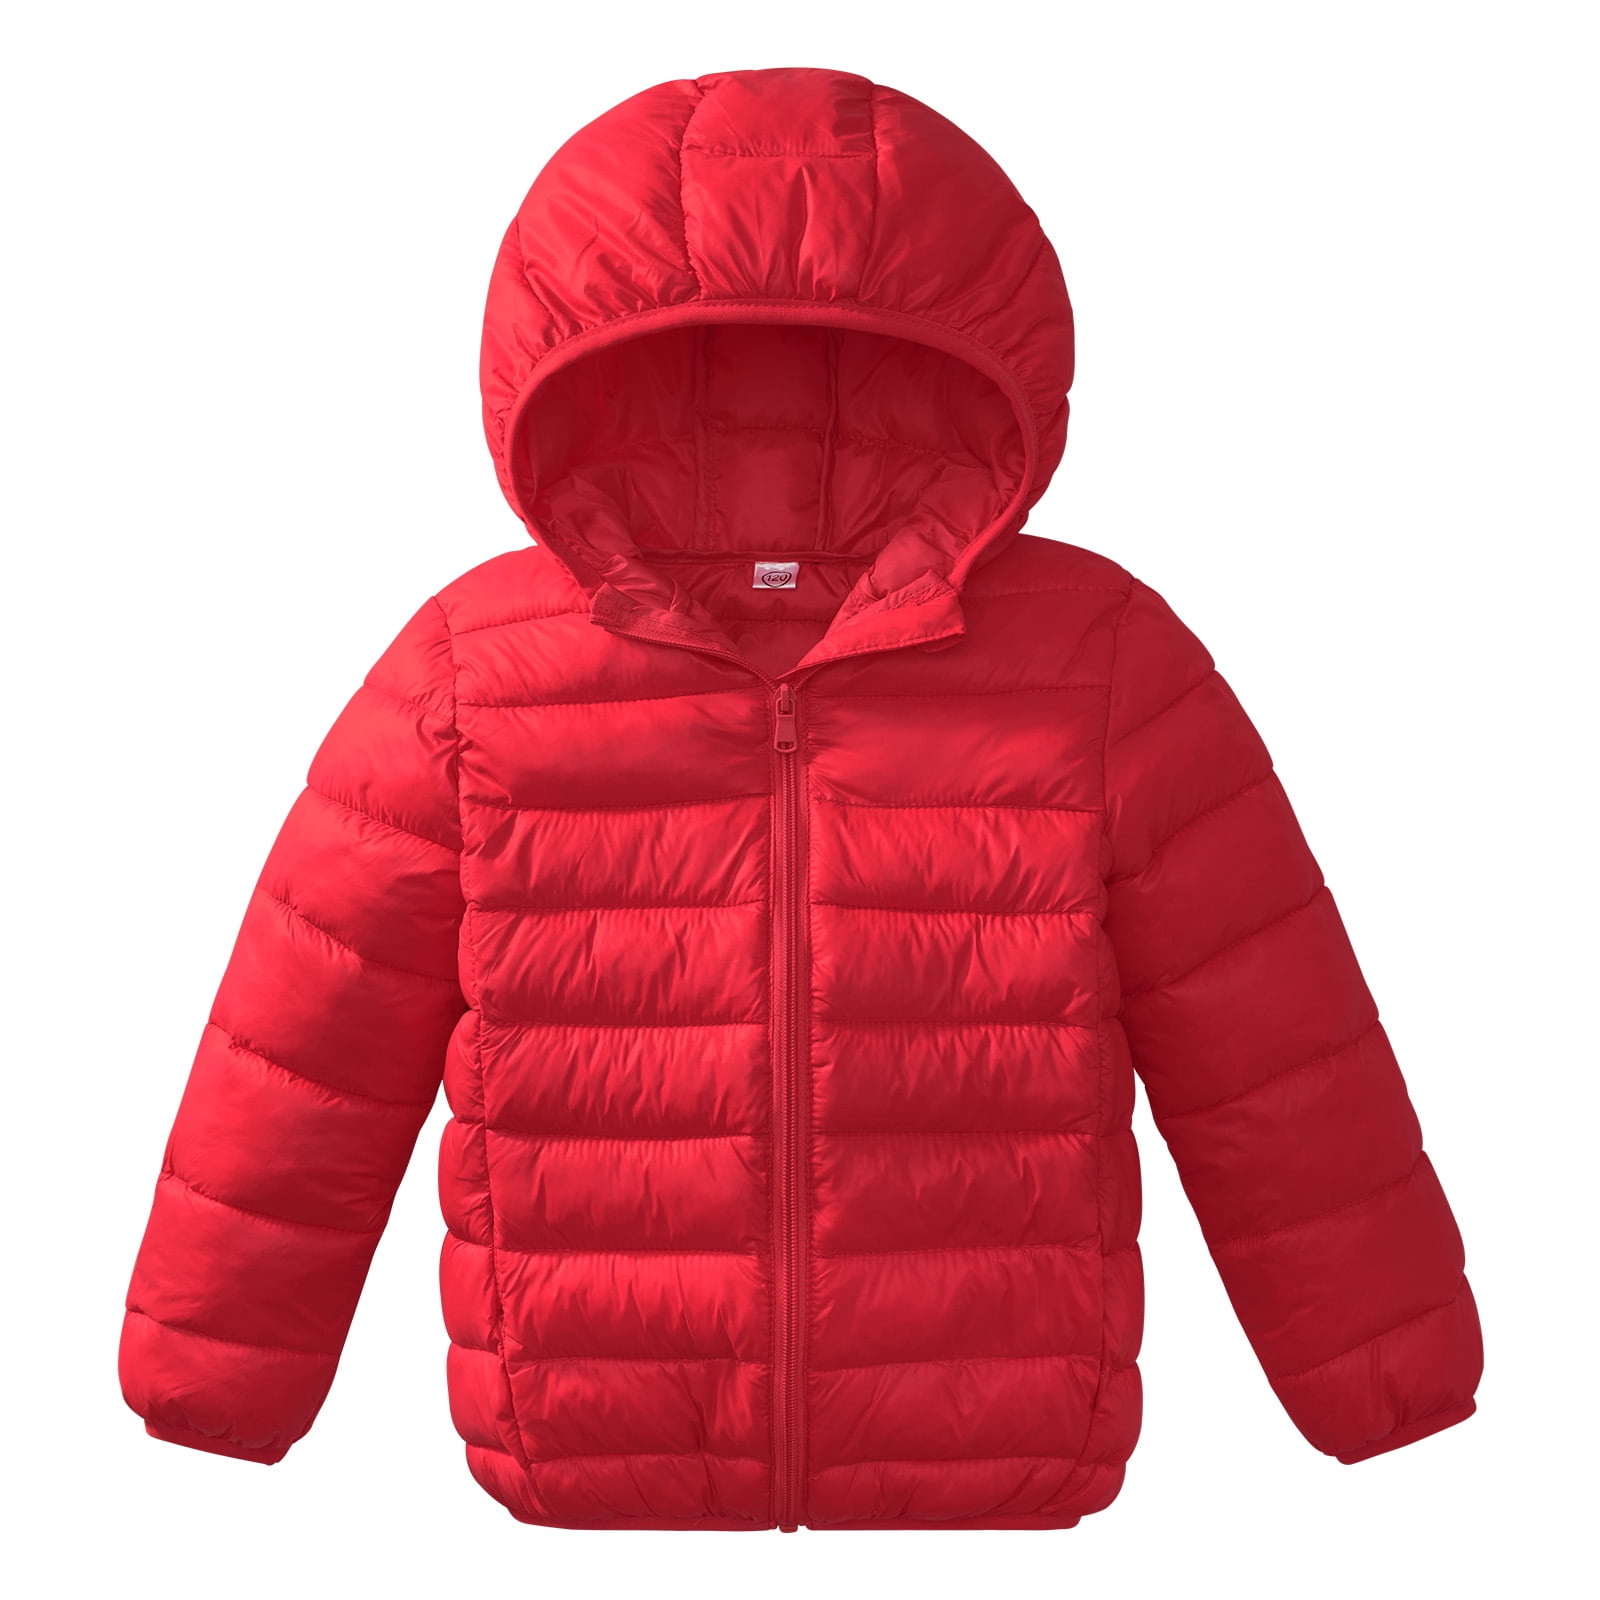 URMAGIC 2-16T Child Warm Light Puffer Jacket Padded Quilted Hooded Coat ...